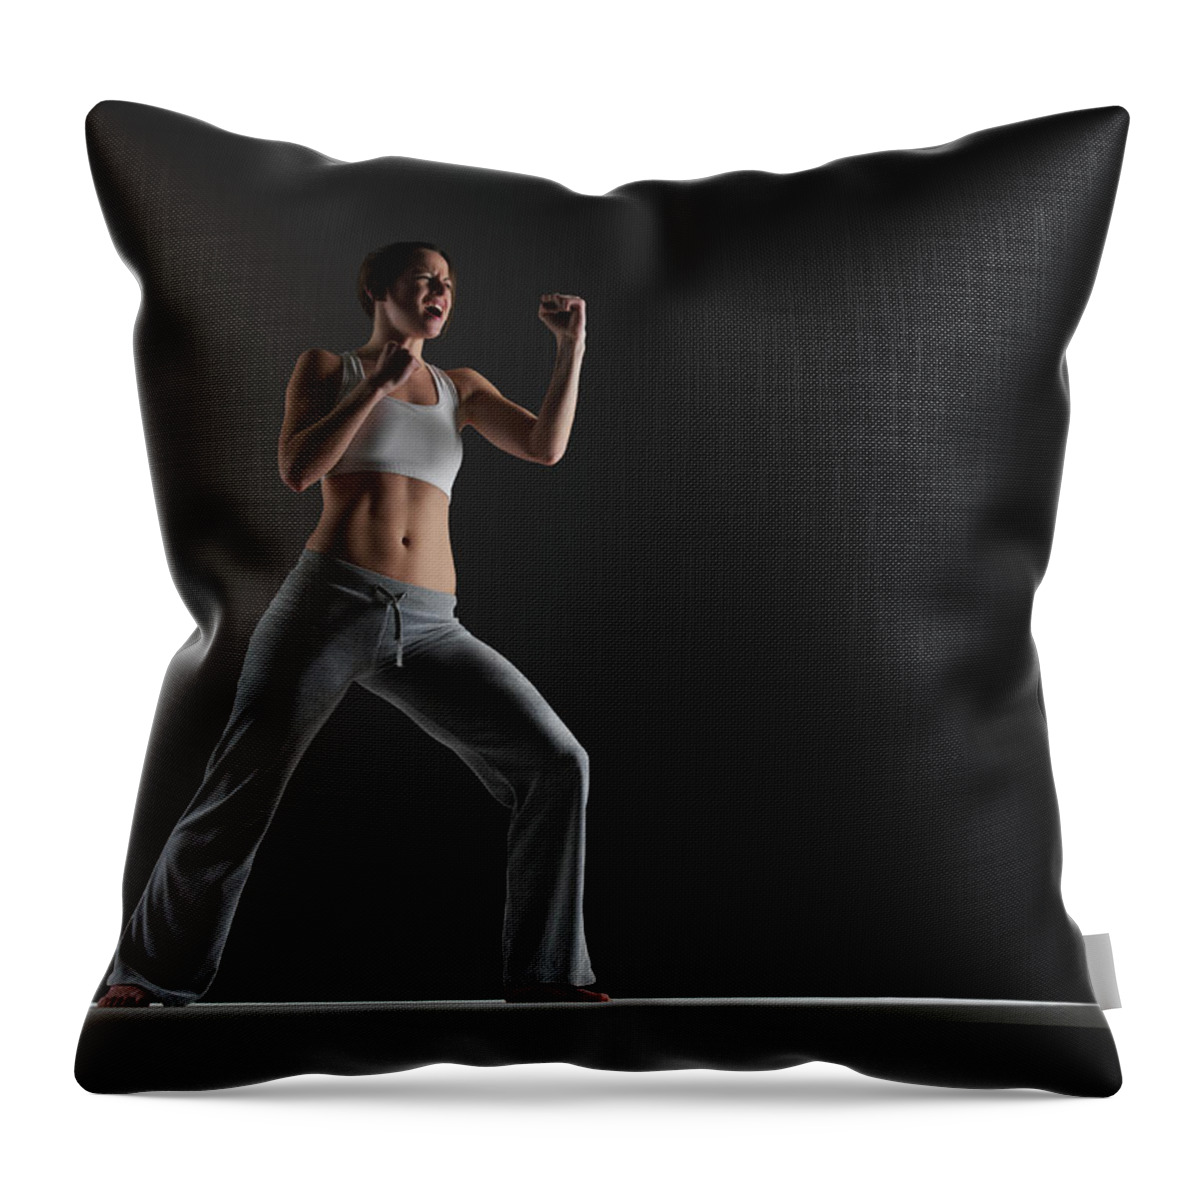 Expertise Throw Pillow featuring the photograph Young Woman Practising Karate, Close-up by John Lamb